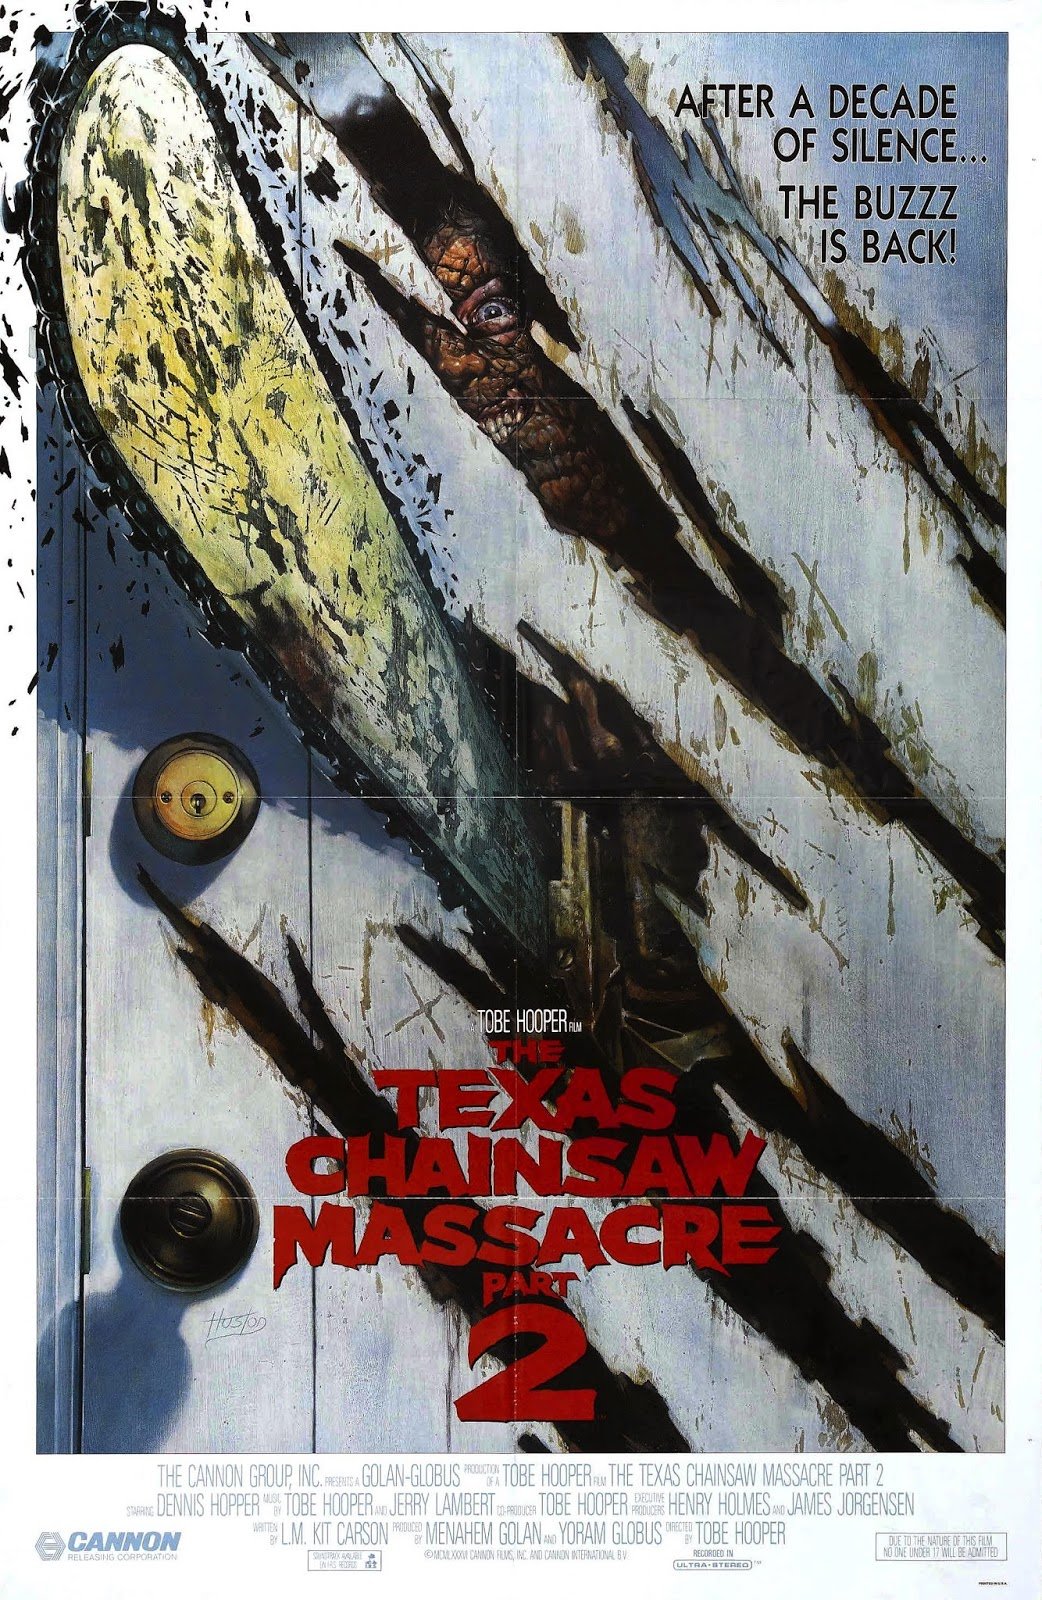 Image of The Texas Chainsaw Massacre 2